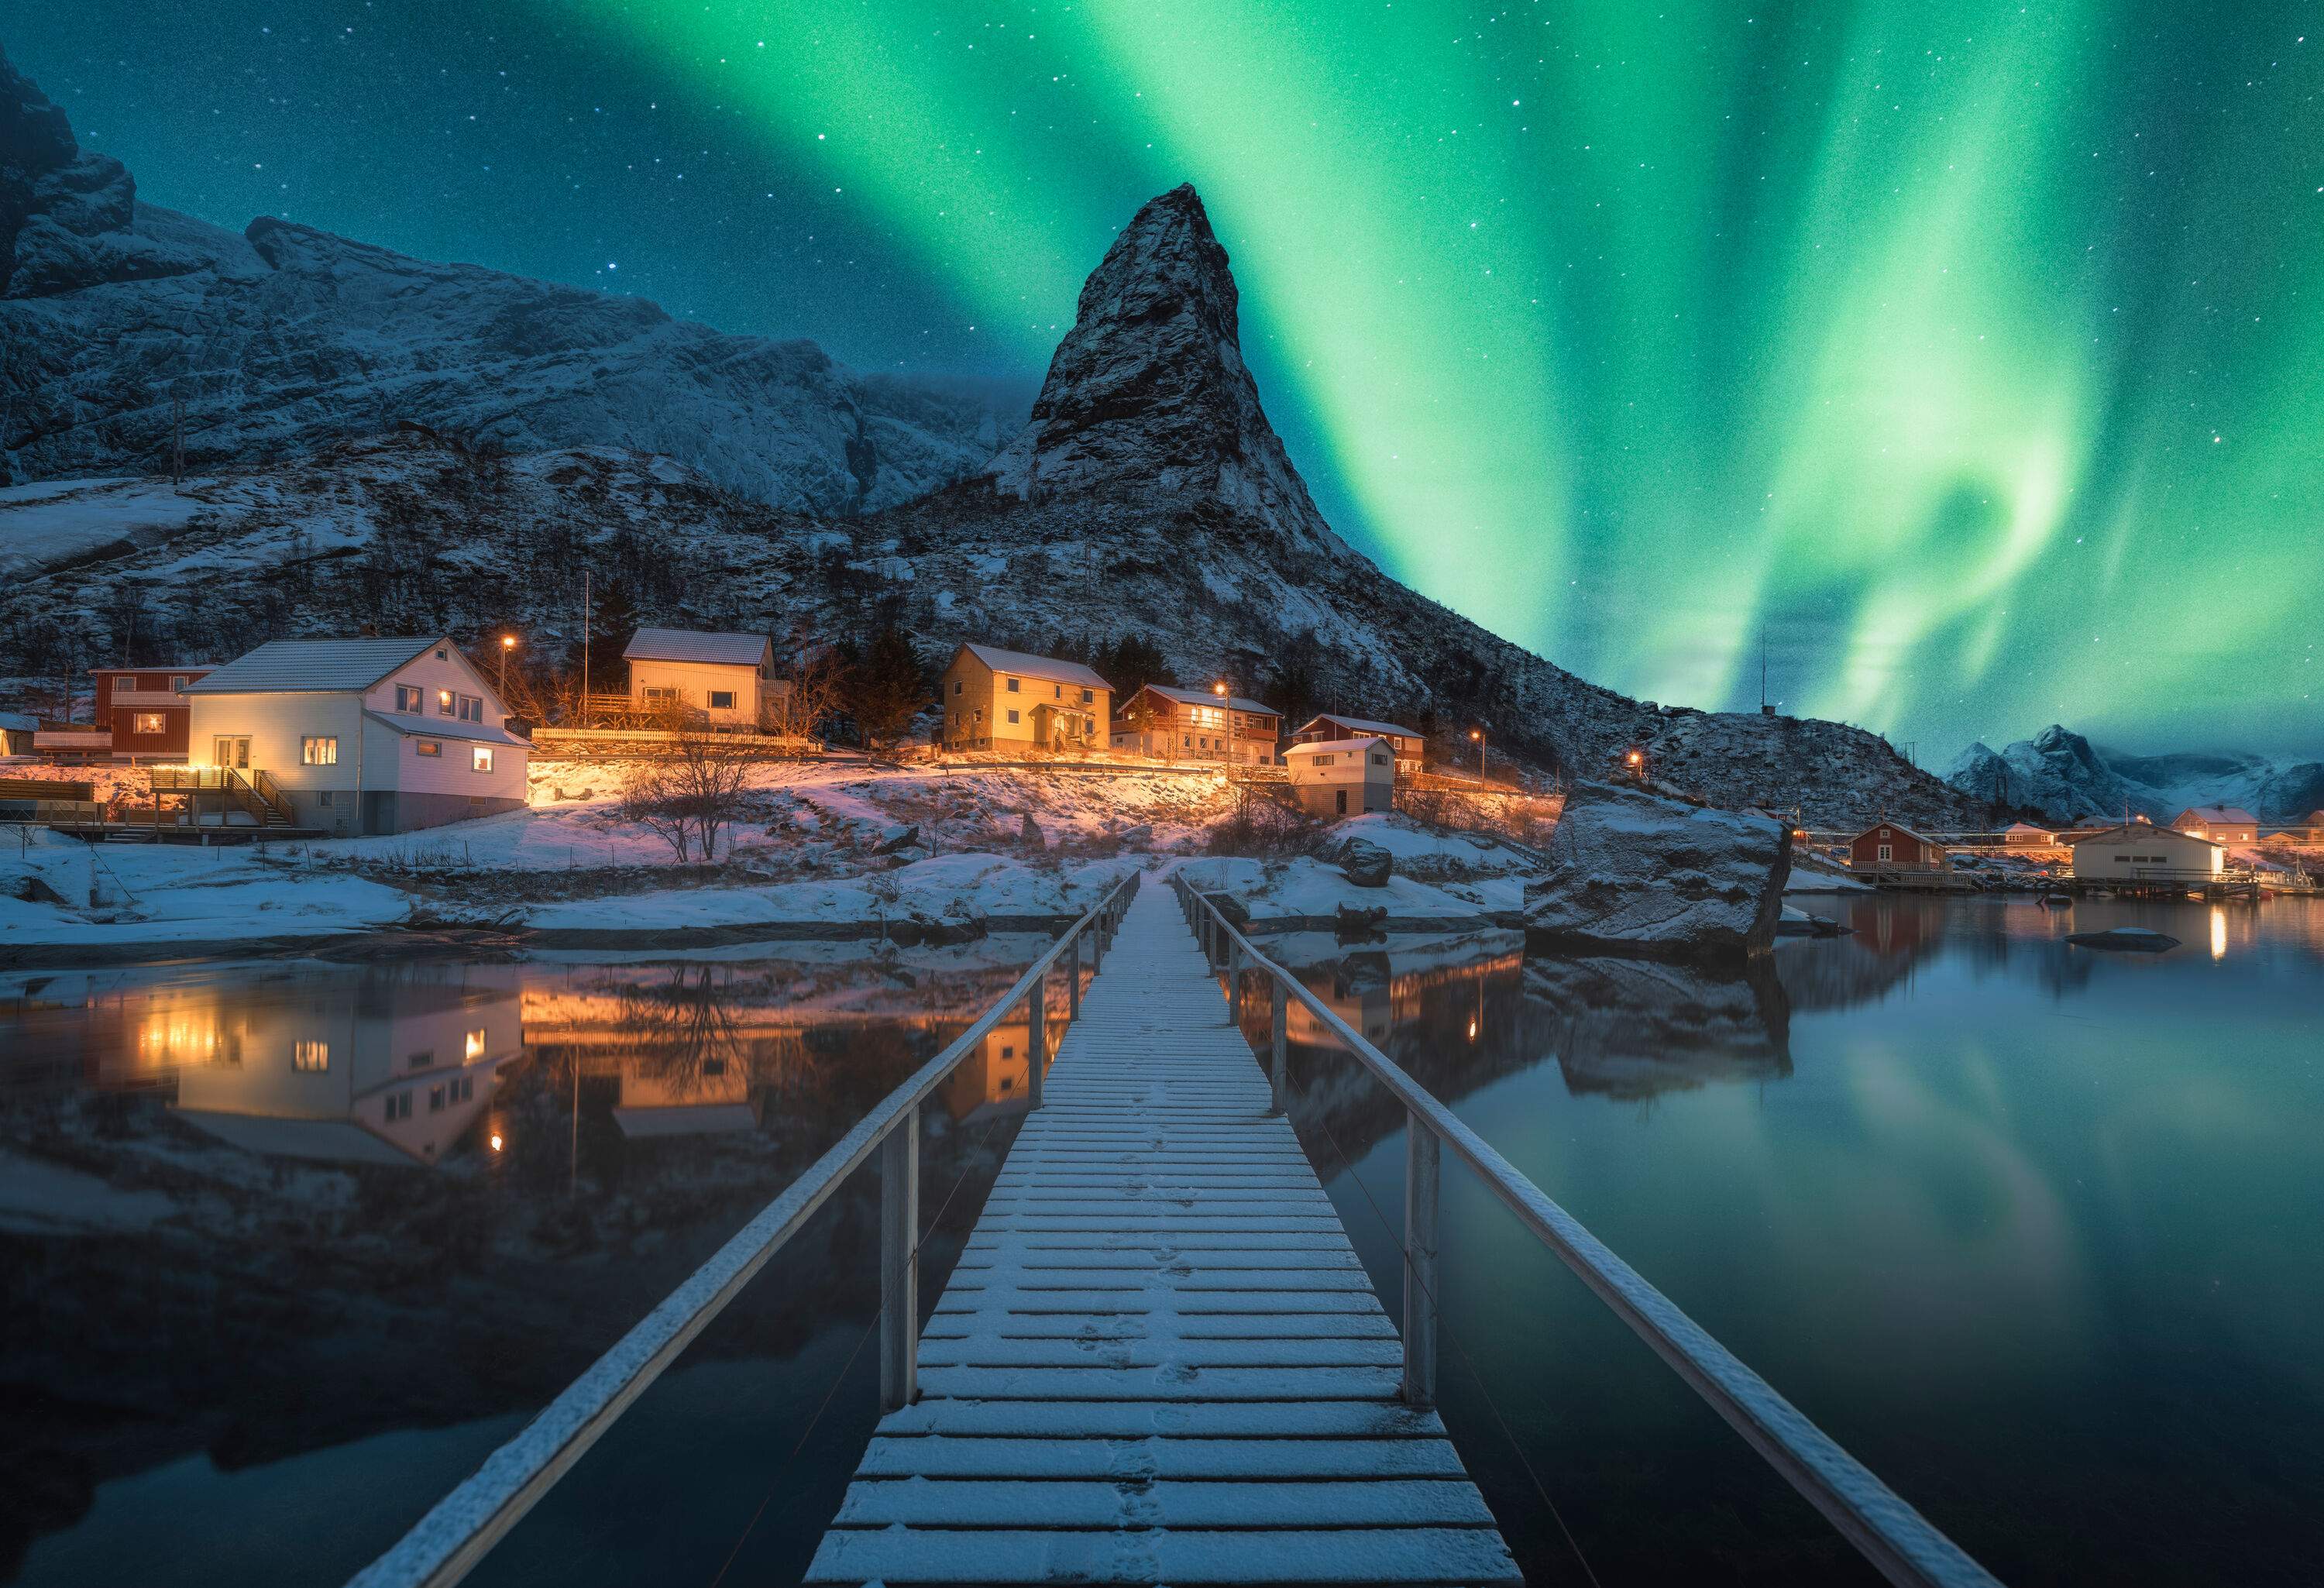 A boardwalk across the sea to a small fishing village lit up by the northern lights blazing across the sky.